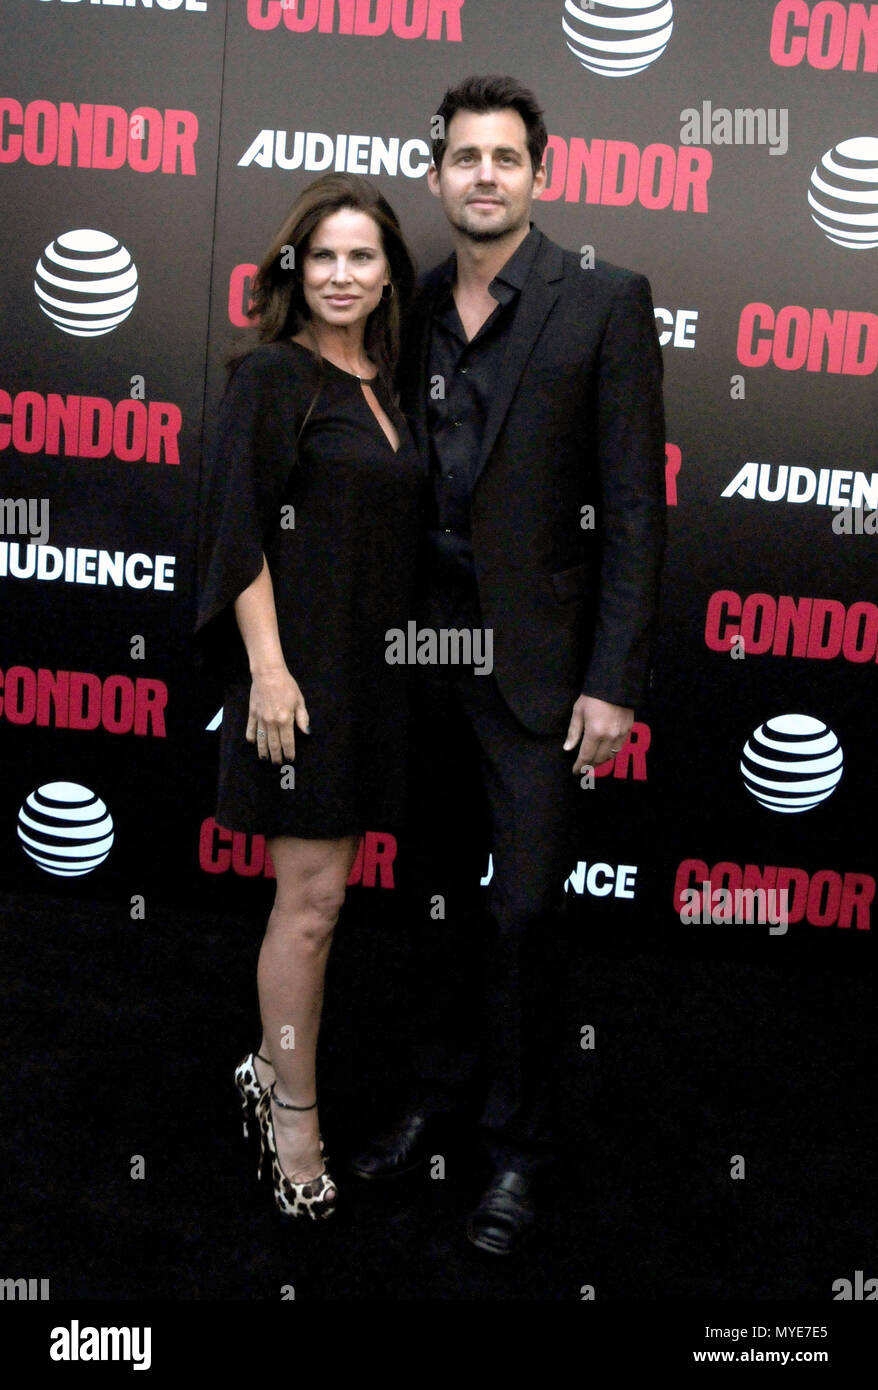 Los Angeles, California, USA. 6th June, 2018. (L-R) Julianne Morris and husband Actor Kristoffer Polaha attend AT&T Audience Network's 'Condor' Premiere on June 6, 2018 at NeueHouse Hollywood in Los Angeles, California. Photo by Barry King/Alamy Live News Stock Photo